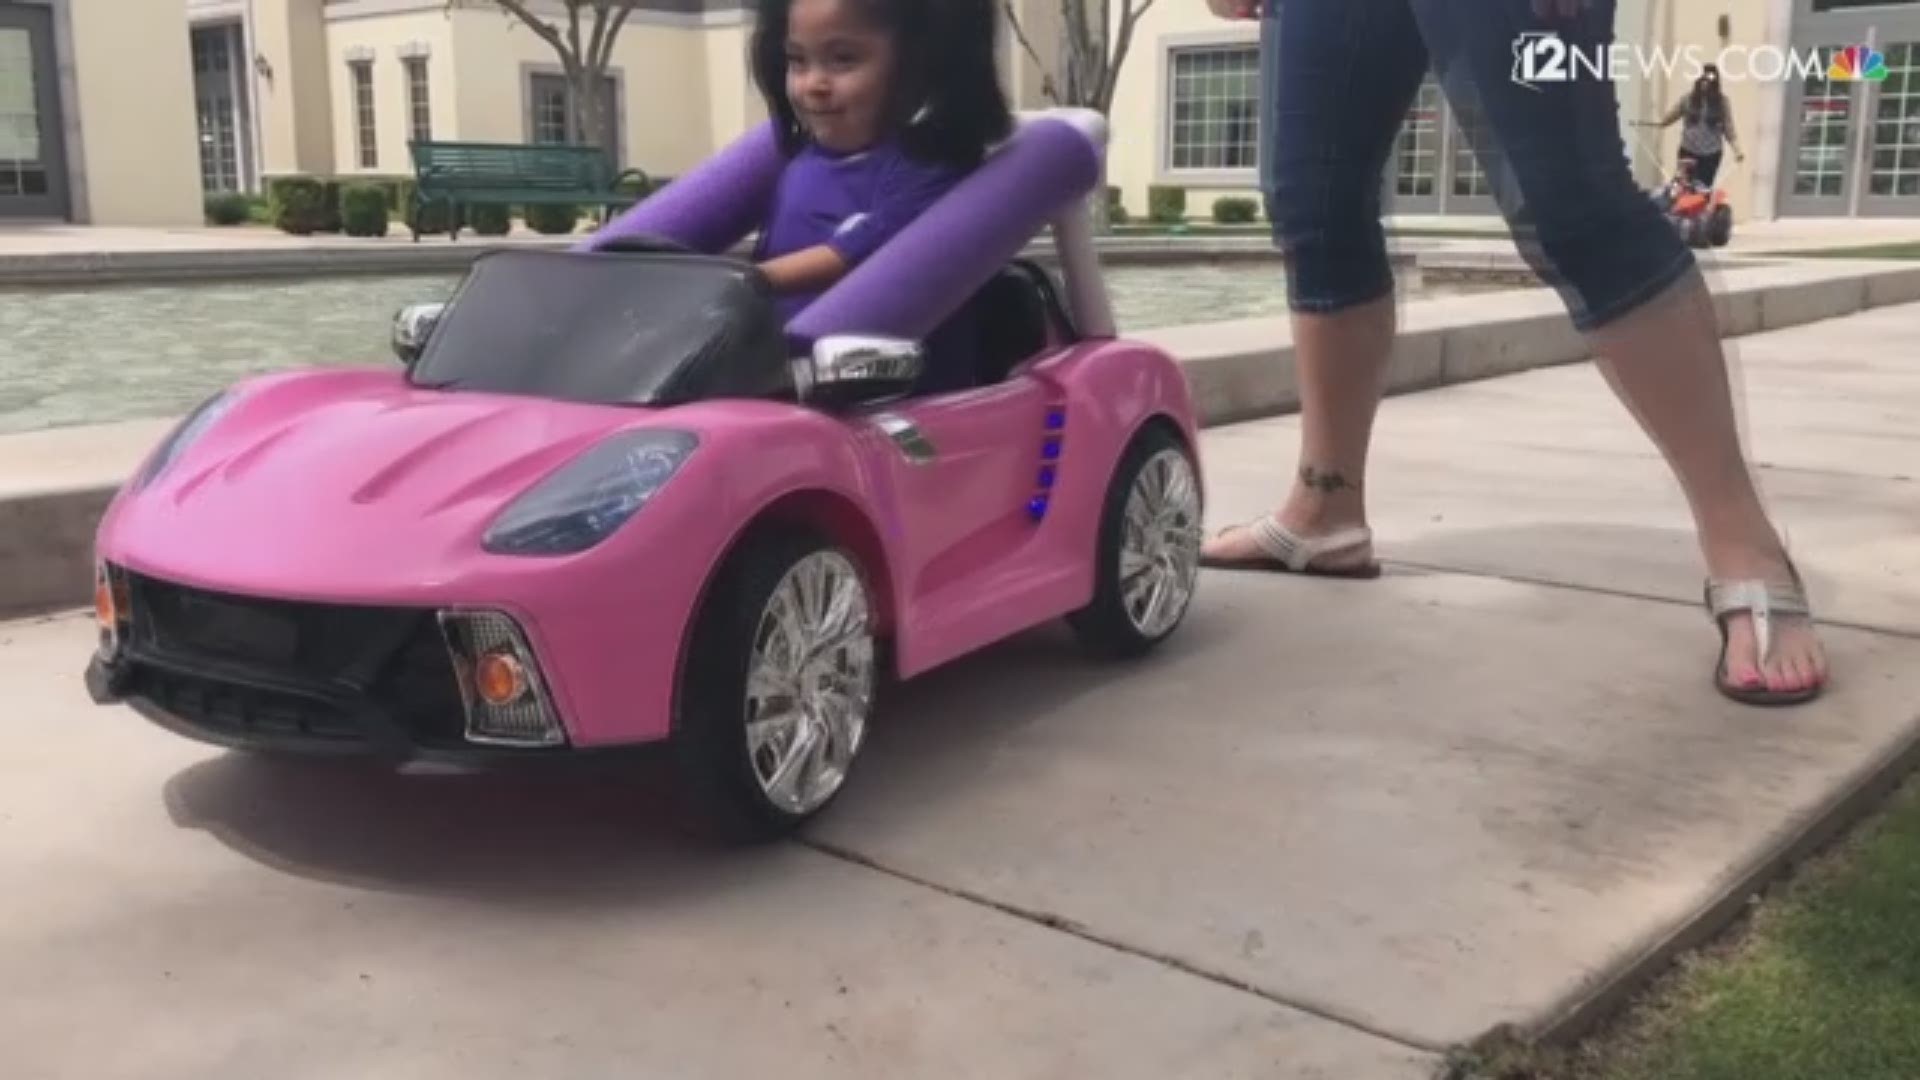 Power wheel derby cars that are adaptable for children with disabilities